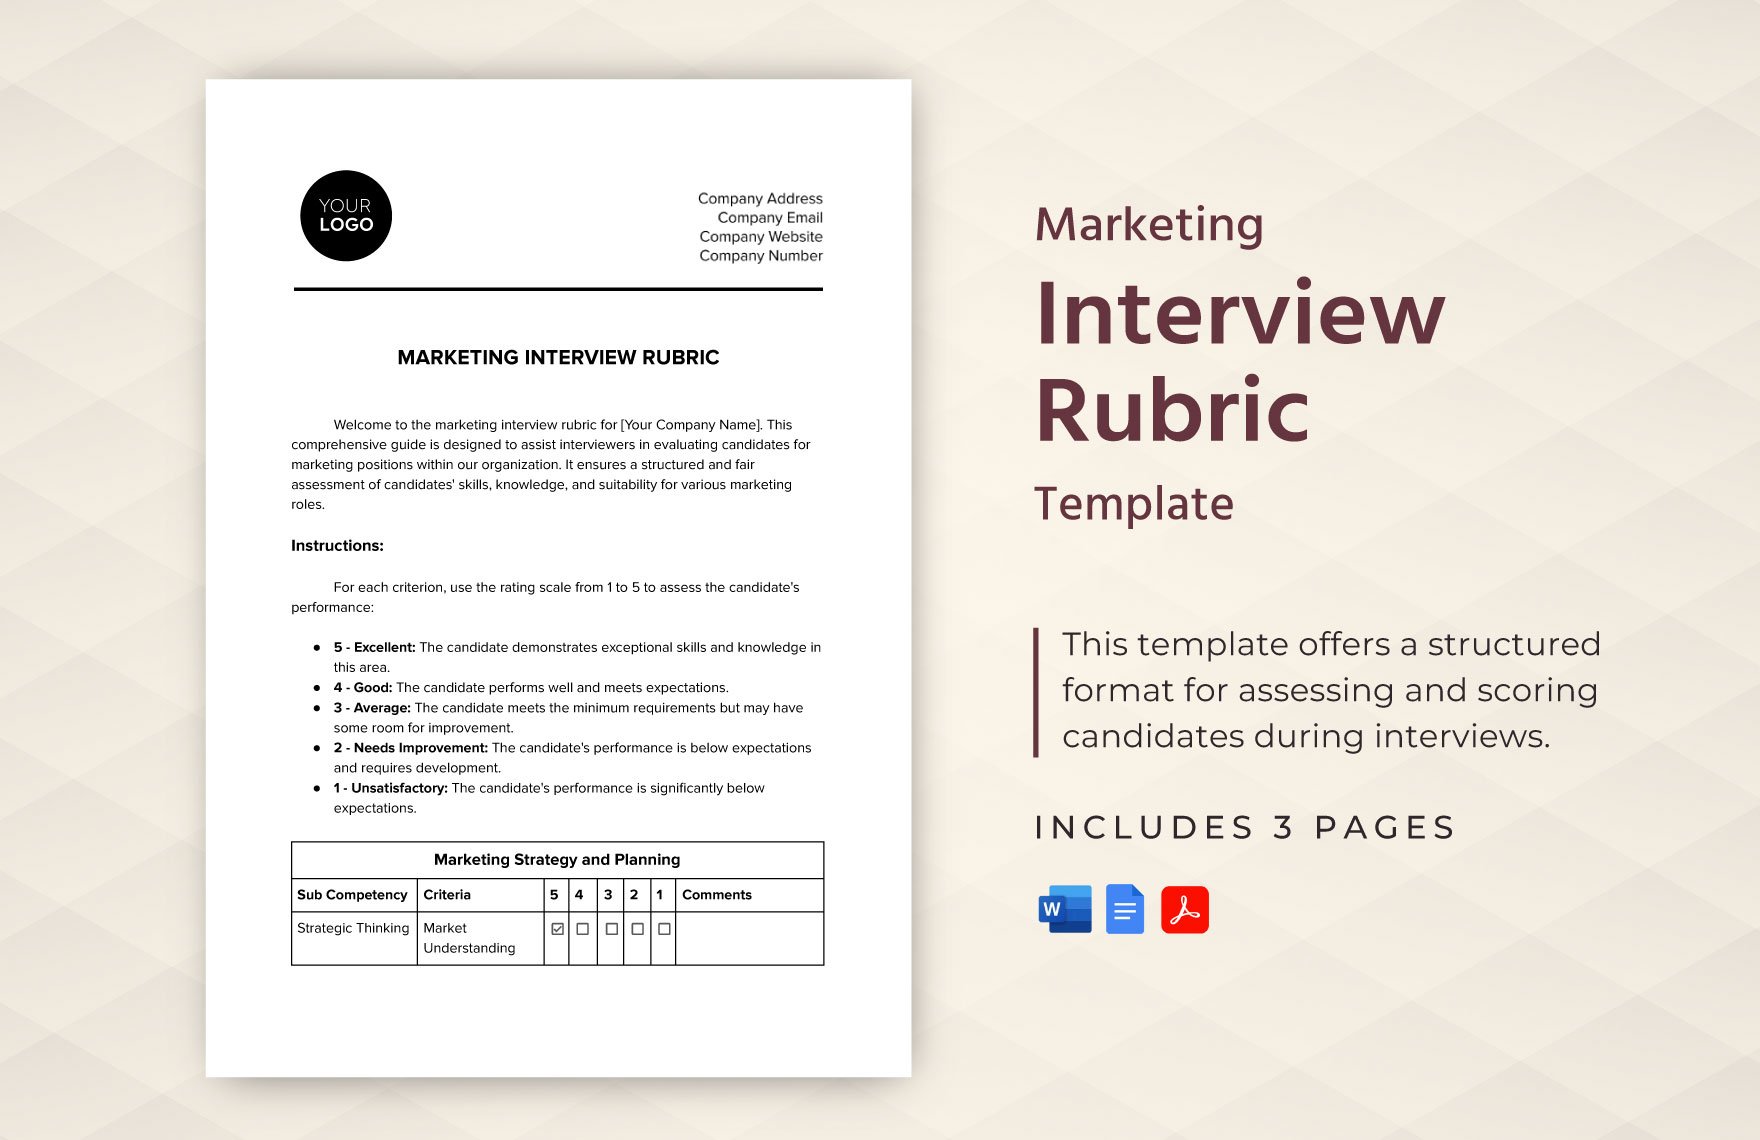 Marketing Interview Rubric Template in Word, Google Docs, PDF